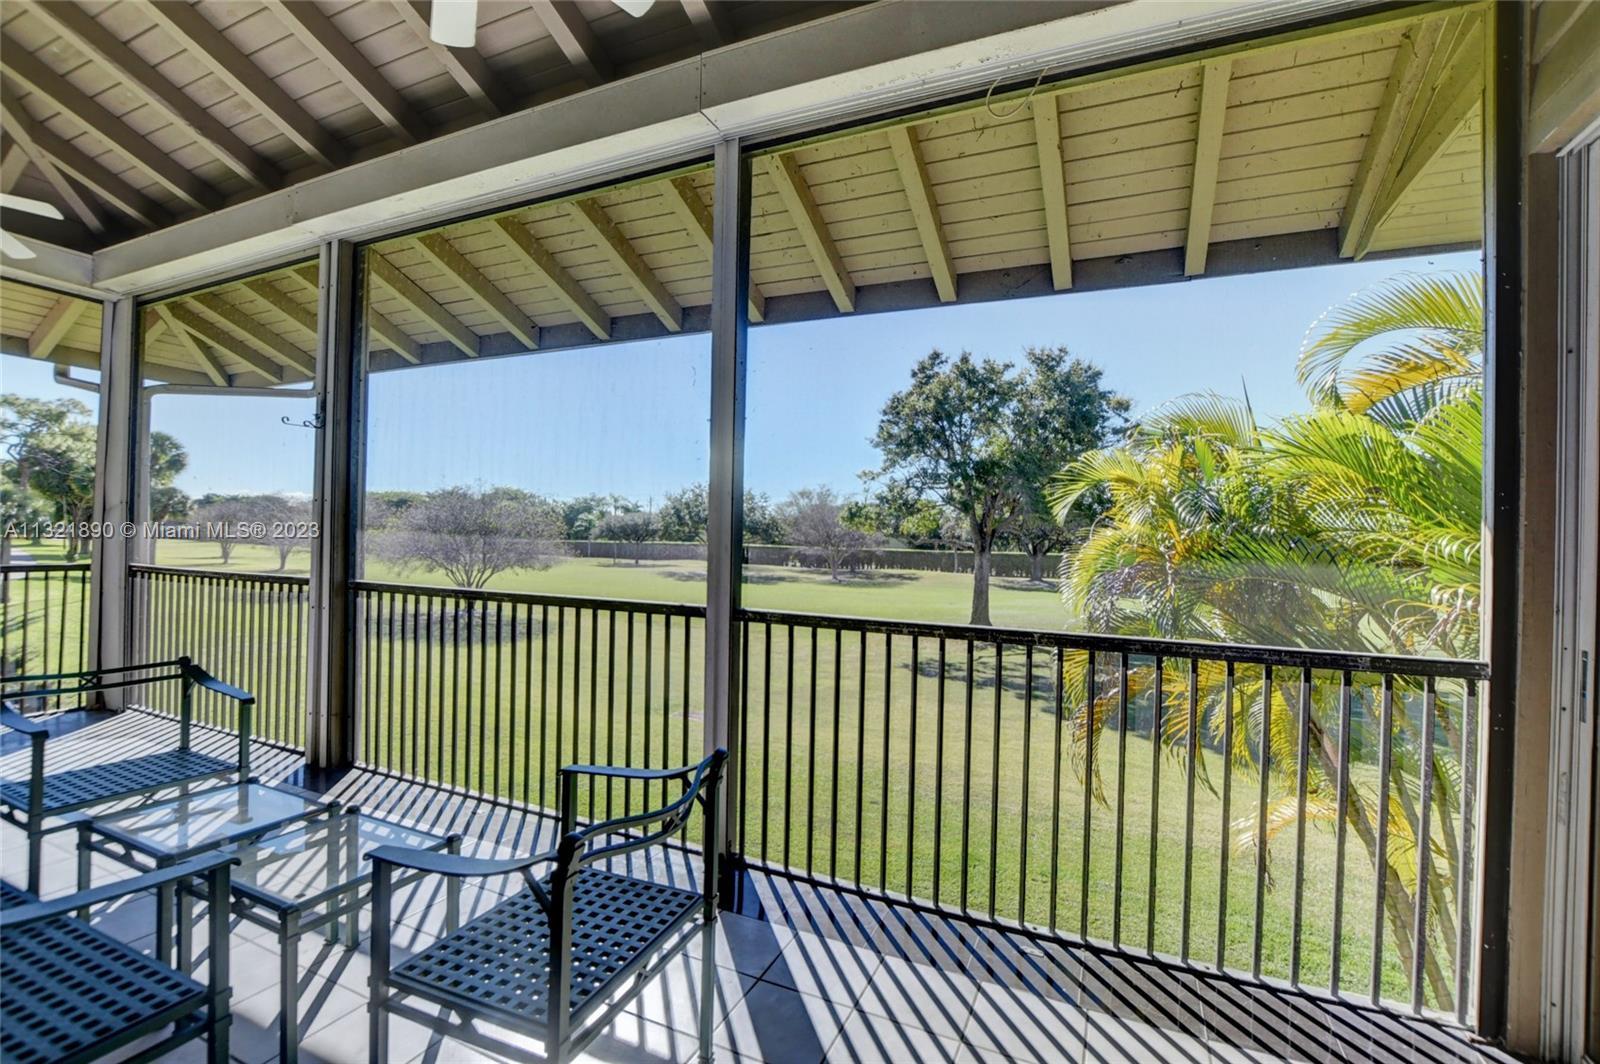 It's all about the view - enjoy it from your amazing wrap around balcony! This 2 bedroom/2 bath Caym